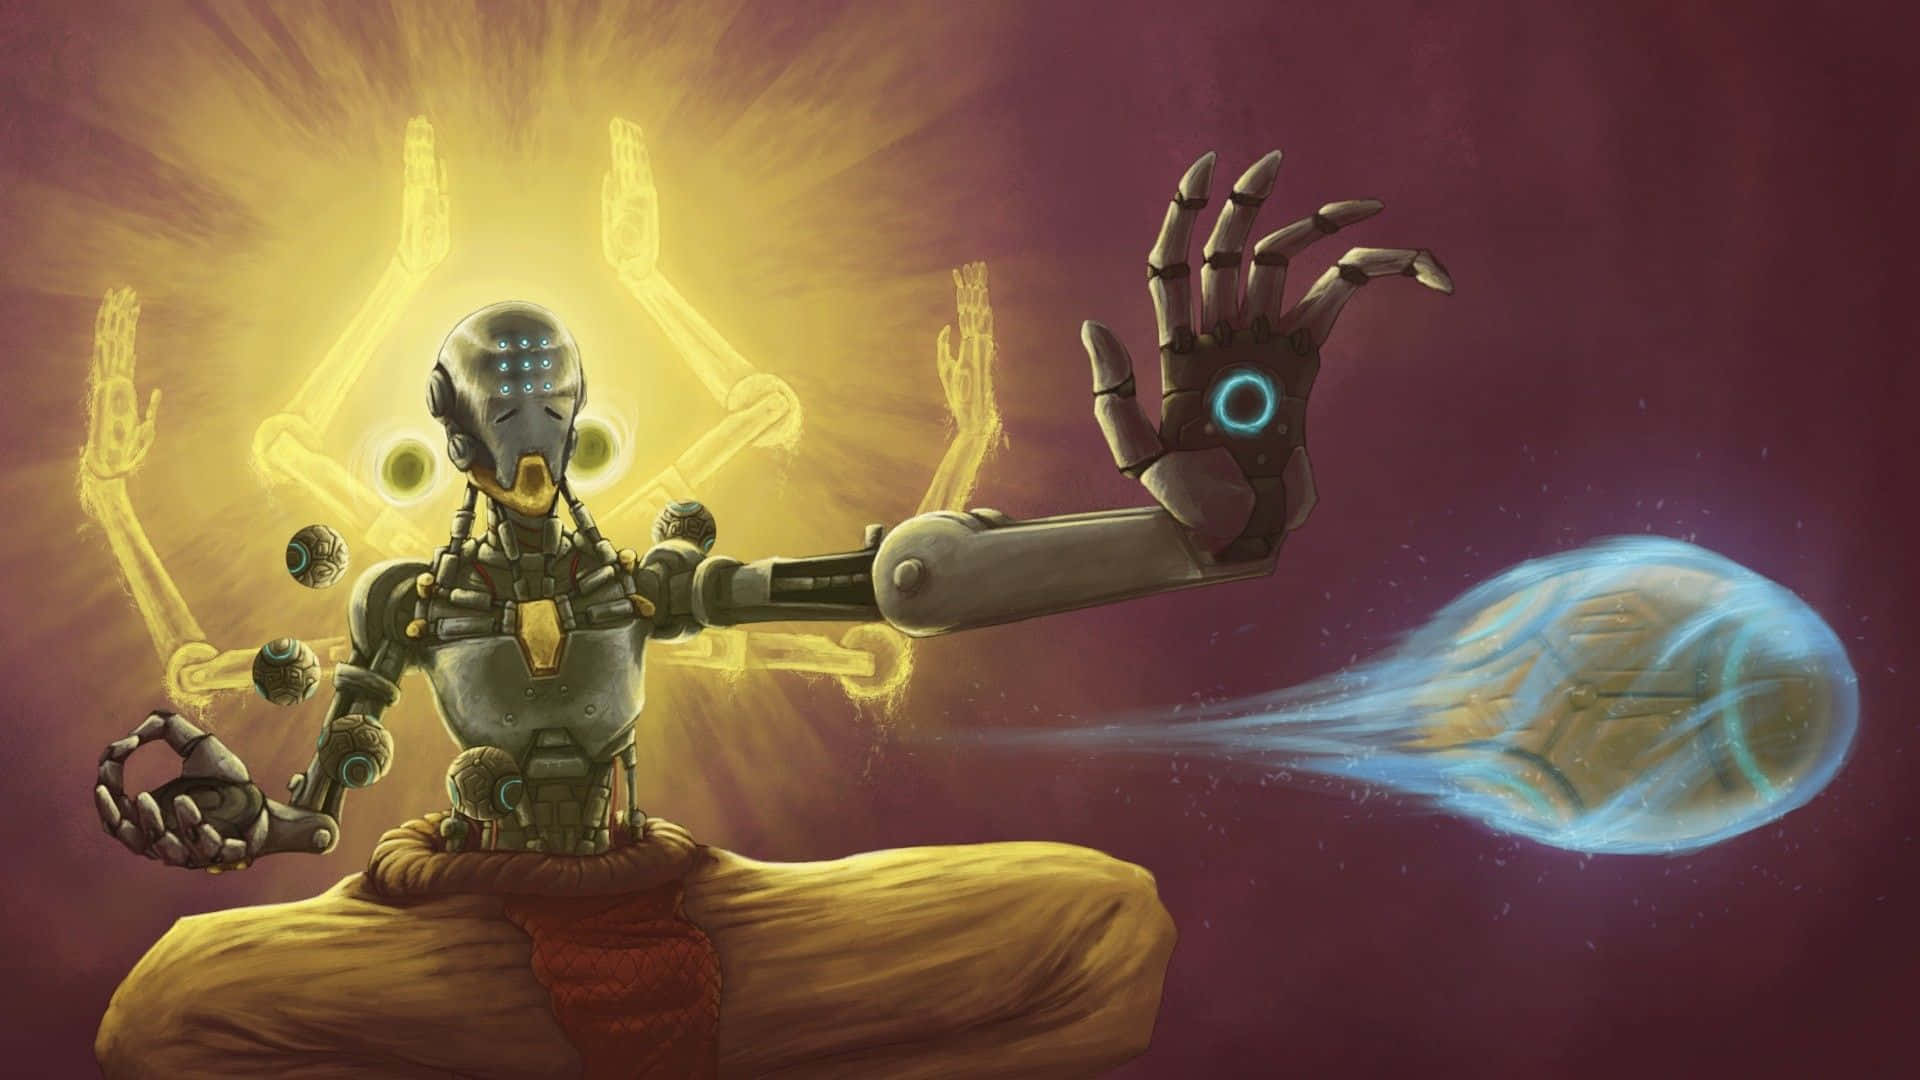 A Robot Is Sitting In A Lotus Position And Holding A Ball Wallpaper